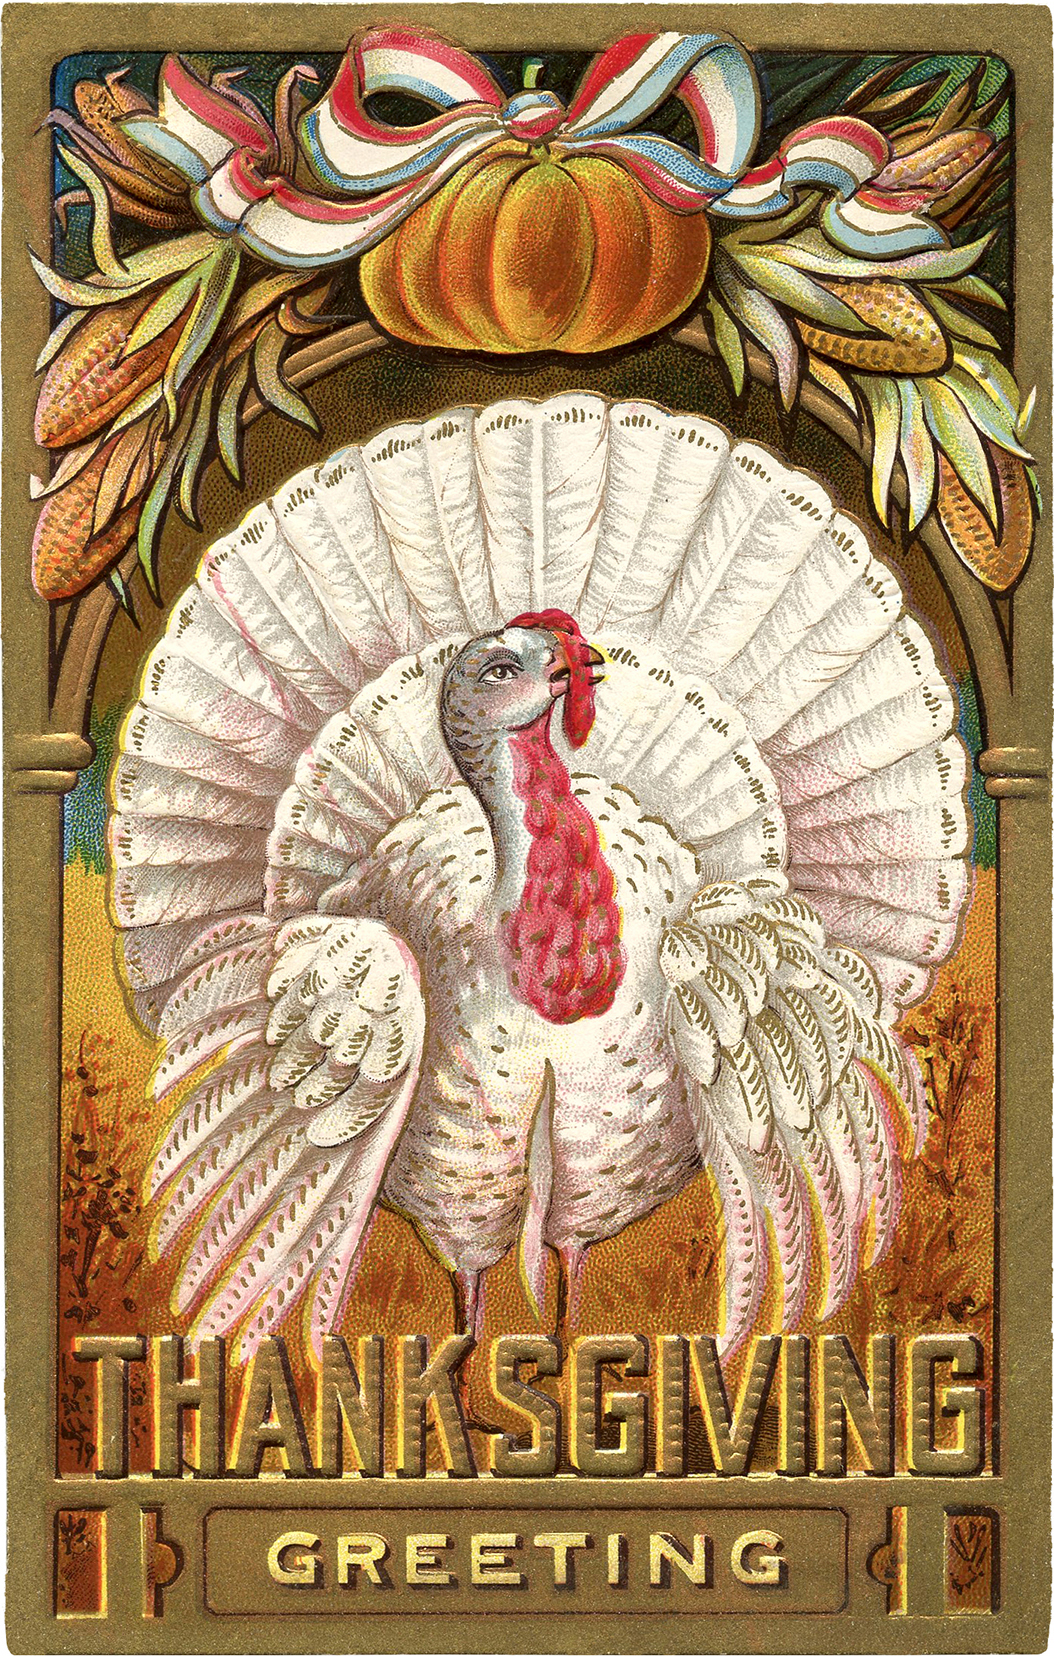 Thanksgiving Clip Art - White Turkey - The Graphics Fairy - Thanksgiving Arts & Crafts Ideas For Adults